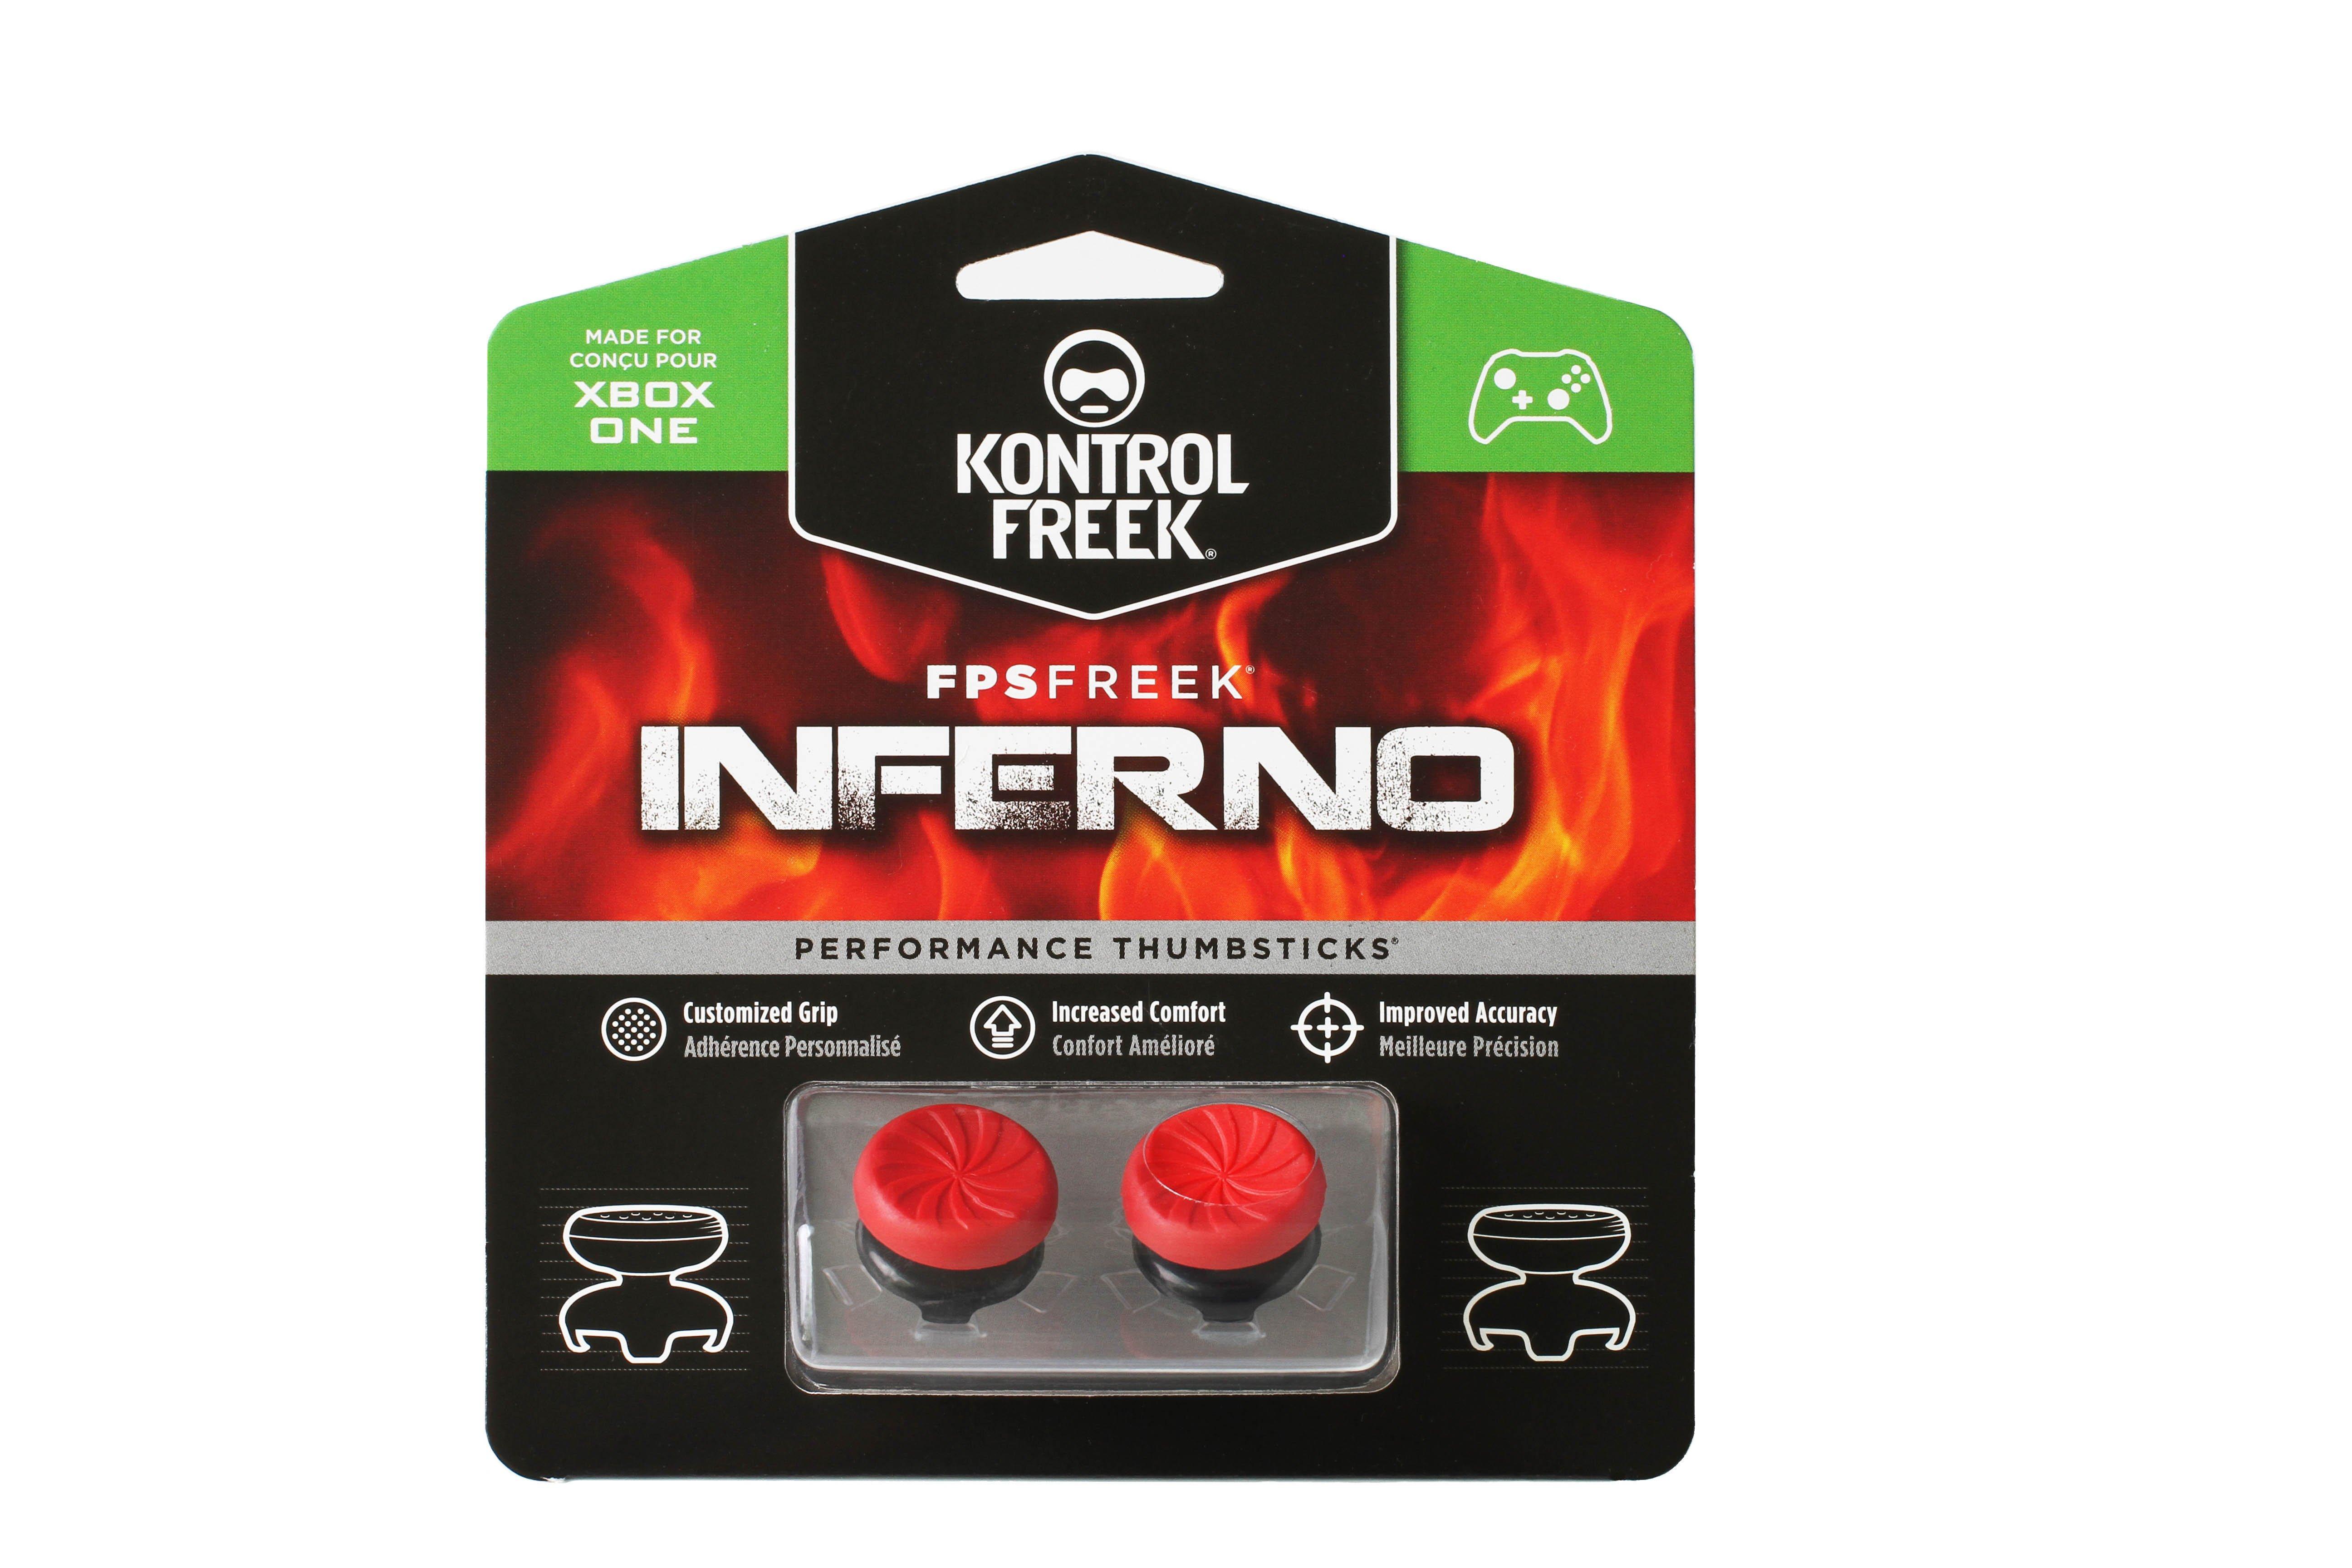 KontrolFreek FPS Freek Inferno Performance Thumbsticks for Xbox Series X  and Xbox One | GameStop